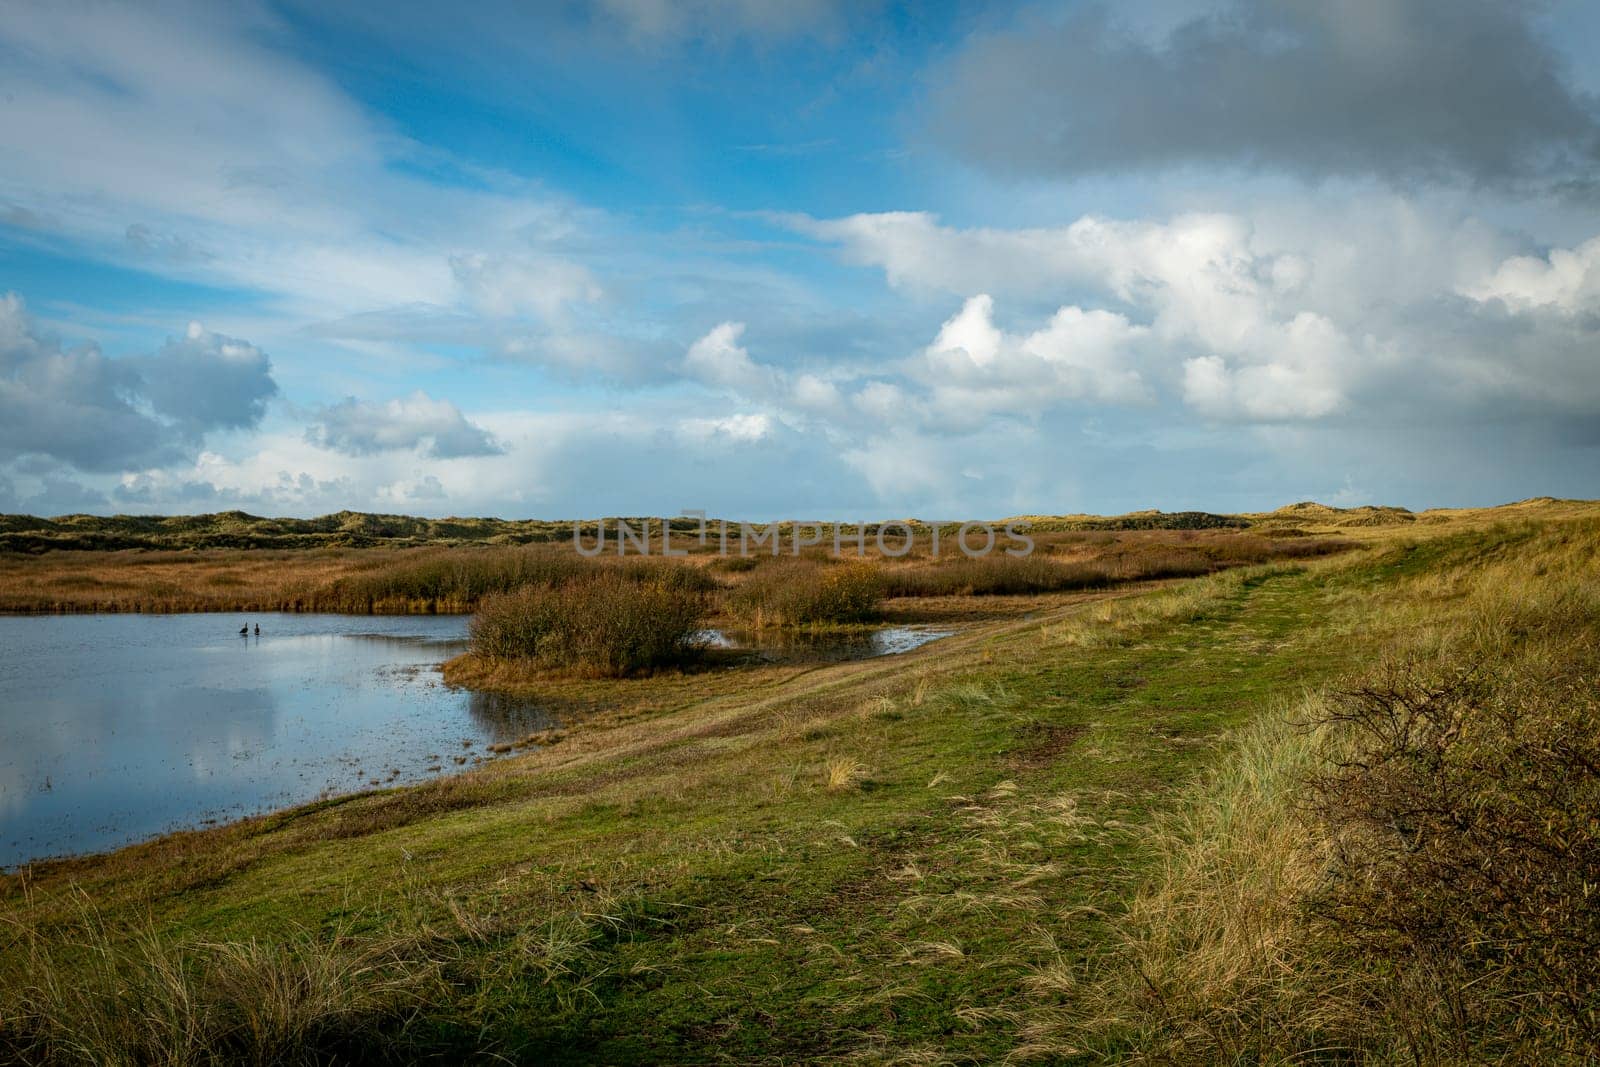 the dunes of the island texel with a small pond by compuinfoto